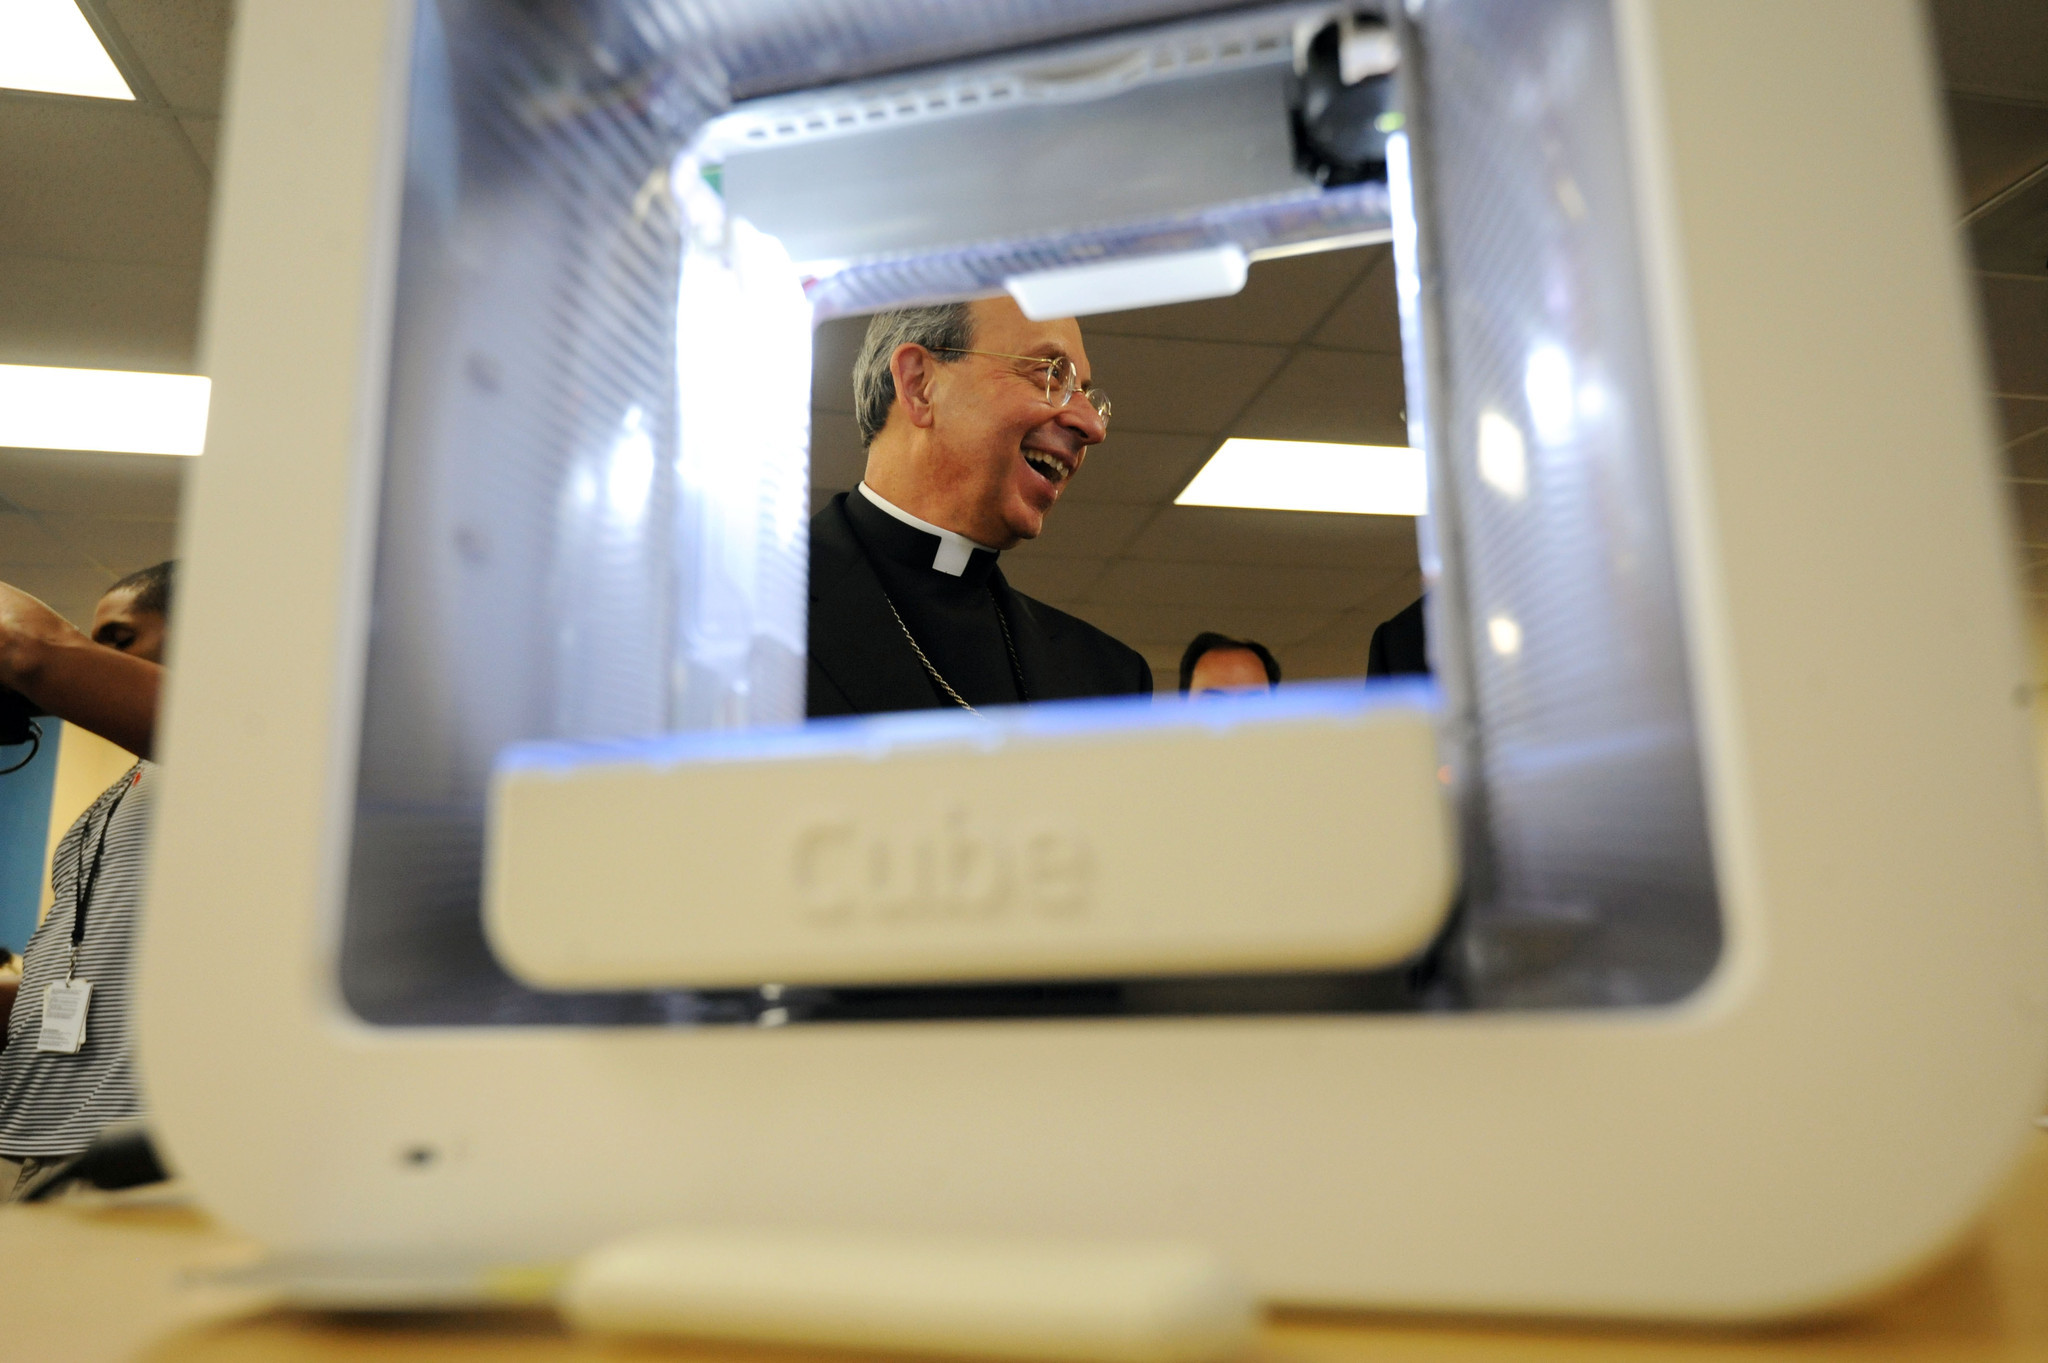 Archdiocese says 3-D printers in every school will aid technology, science curriculum